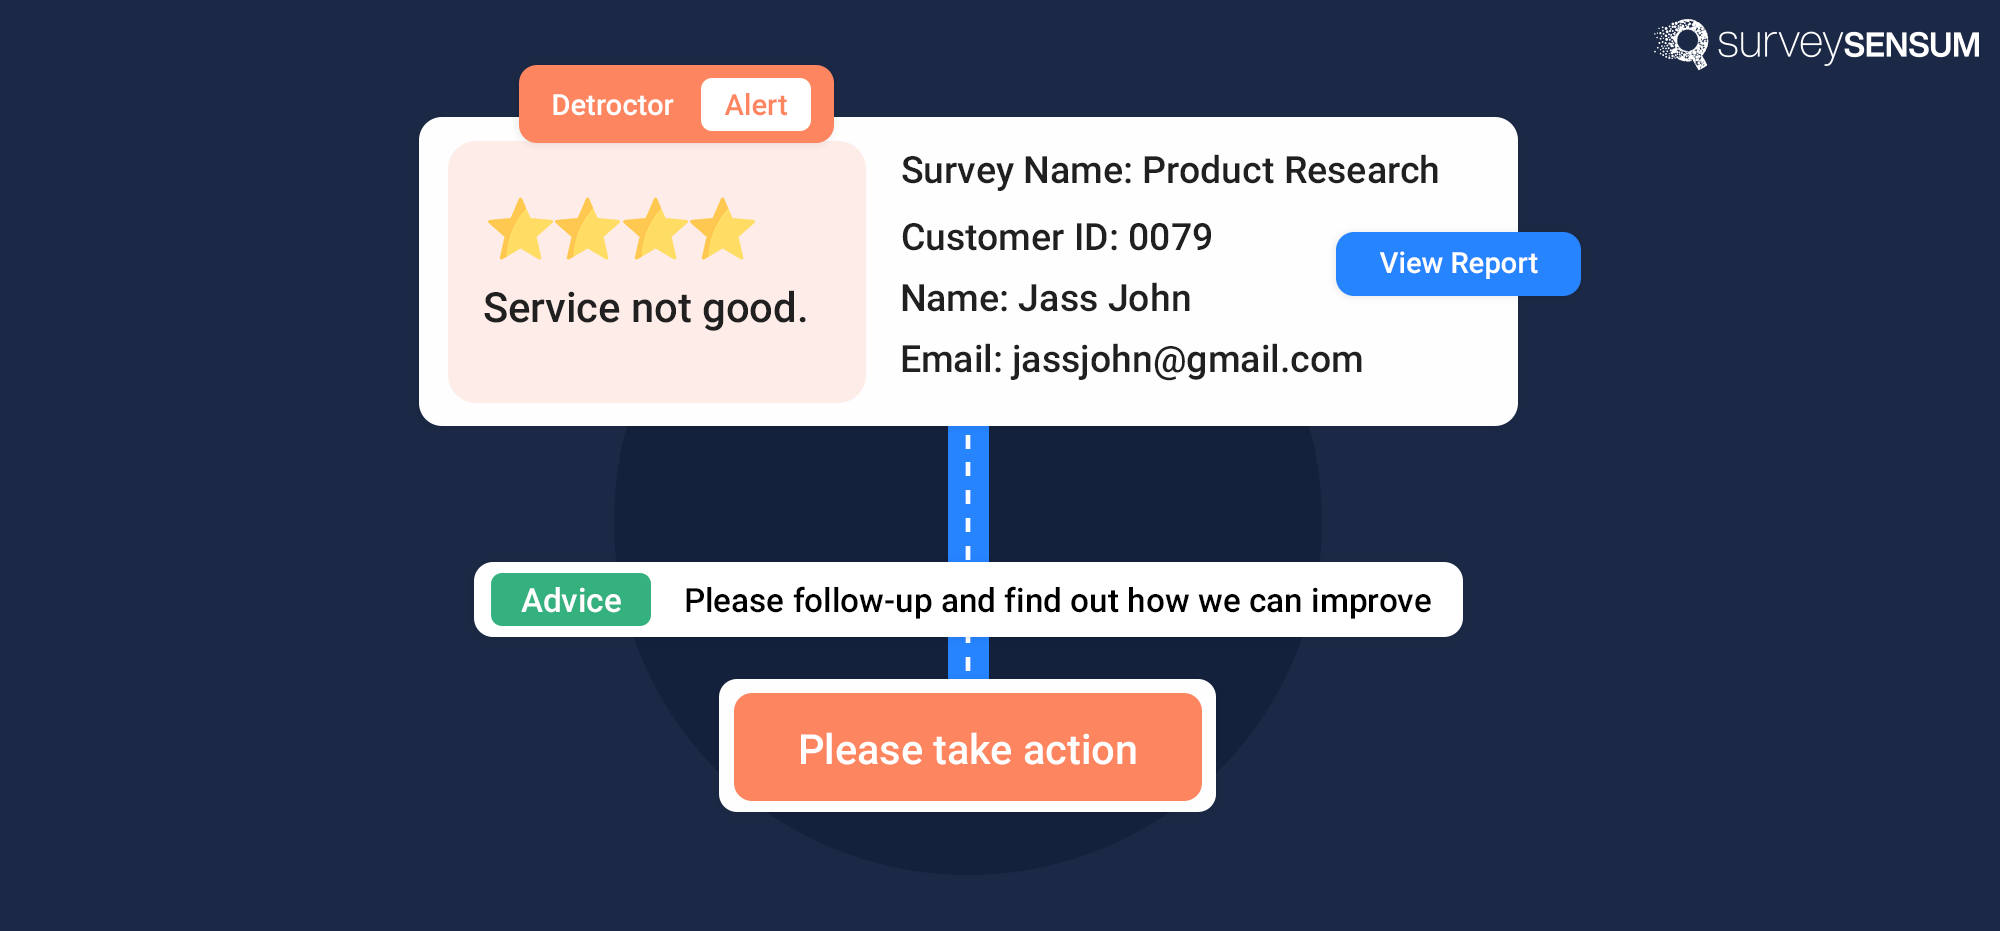 This is the image of the closing the feedback loop process of SurveySensum where feedback and reviews are tracked in real-time and tickets are generated and assigned so the users can take immediate action to resolve issues.